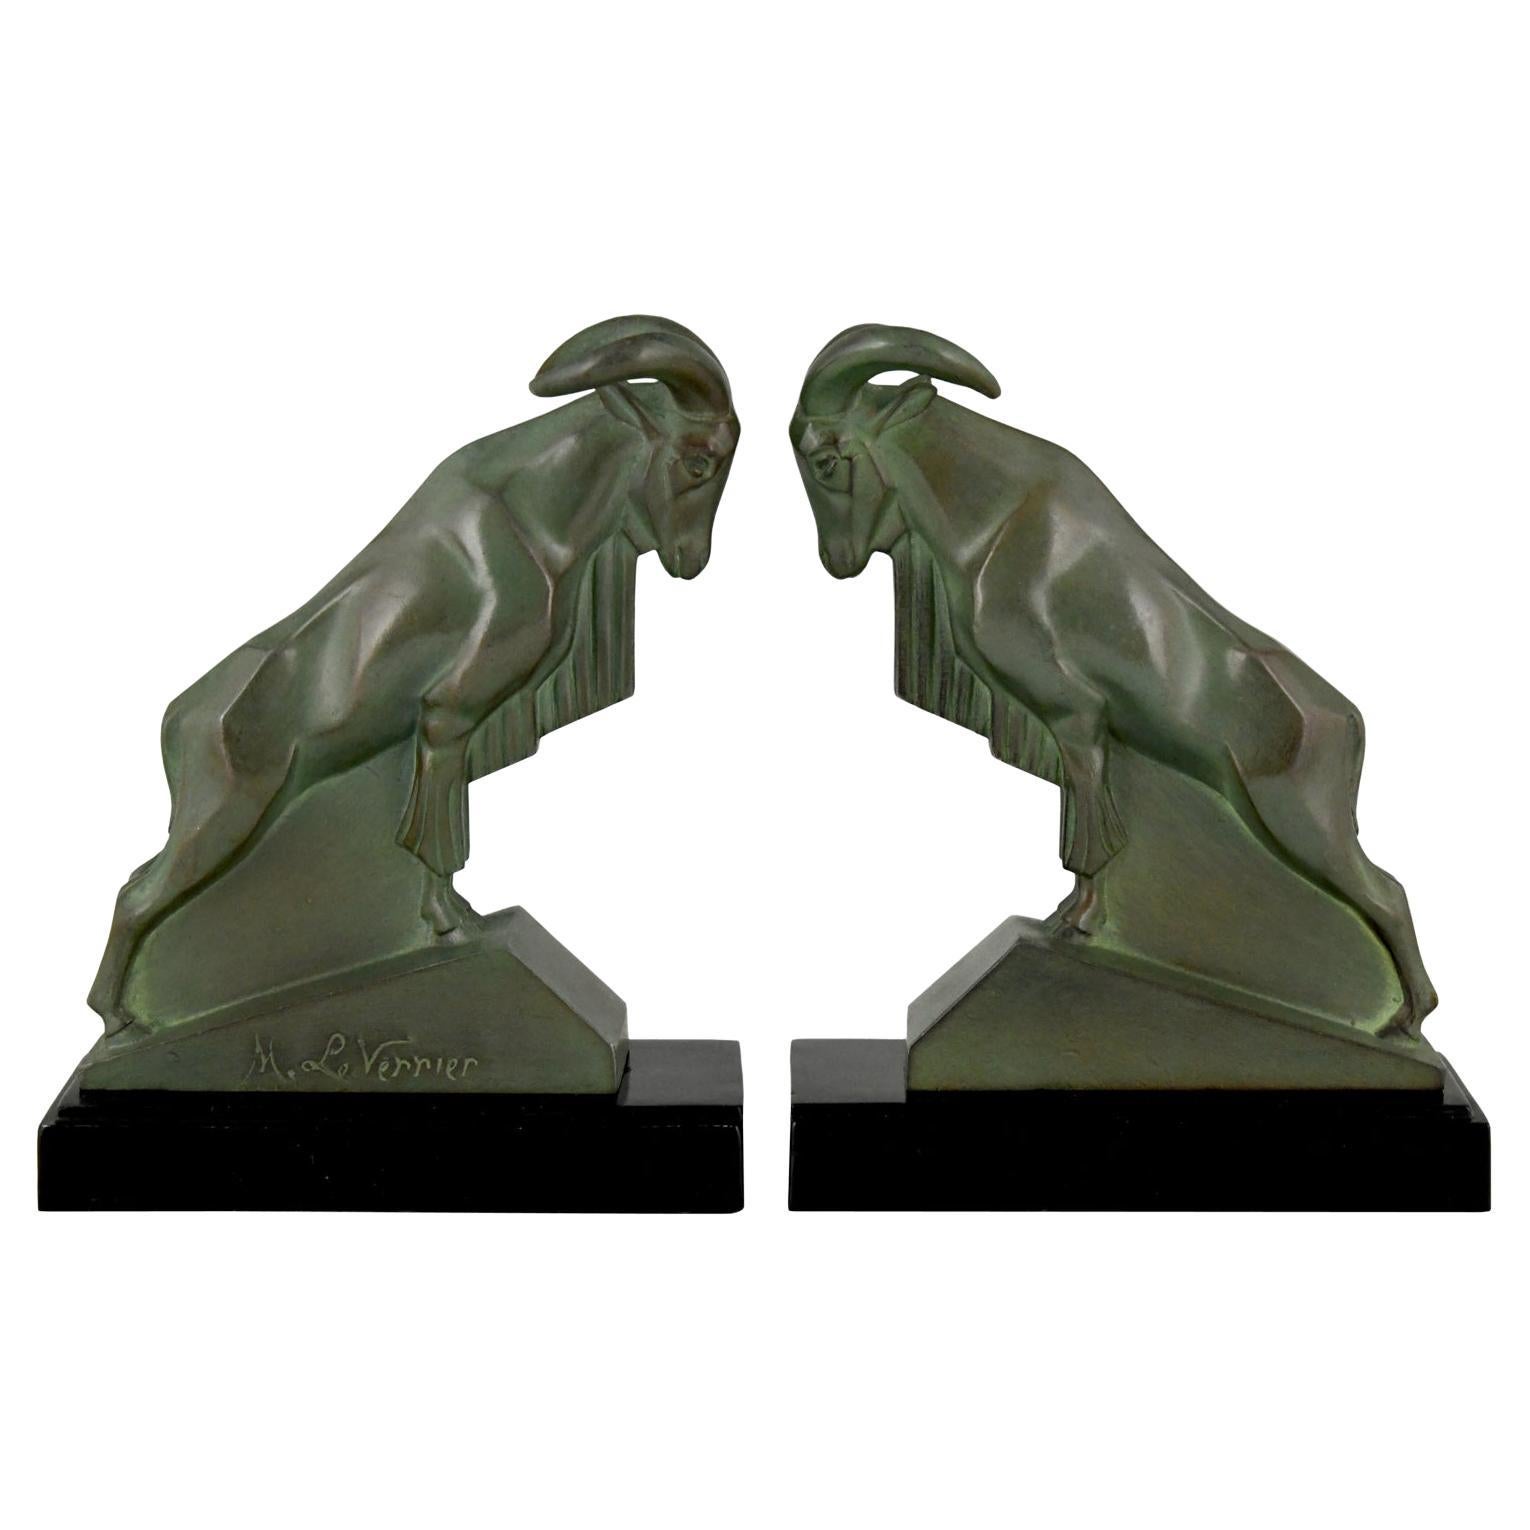 Art Deco Ibex or Ram Bookends Signed by the Sculptor Max Le Verrier France, 1930